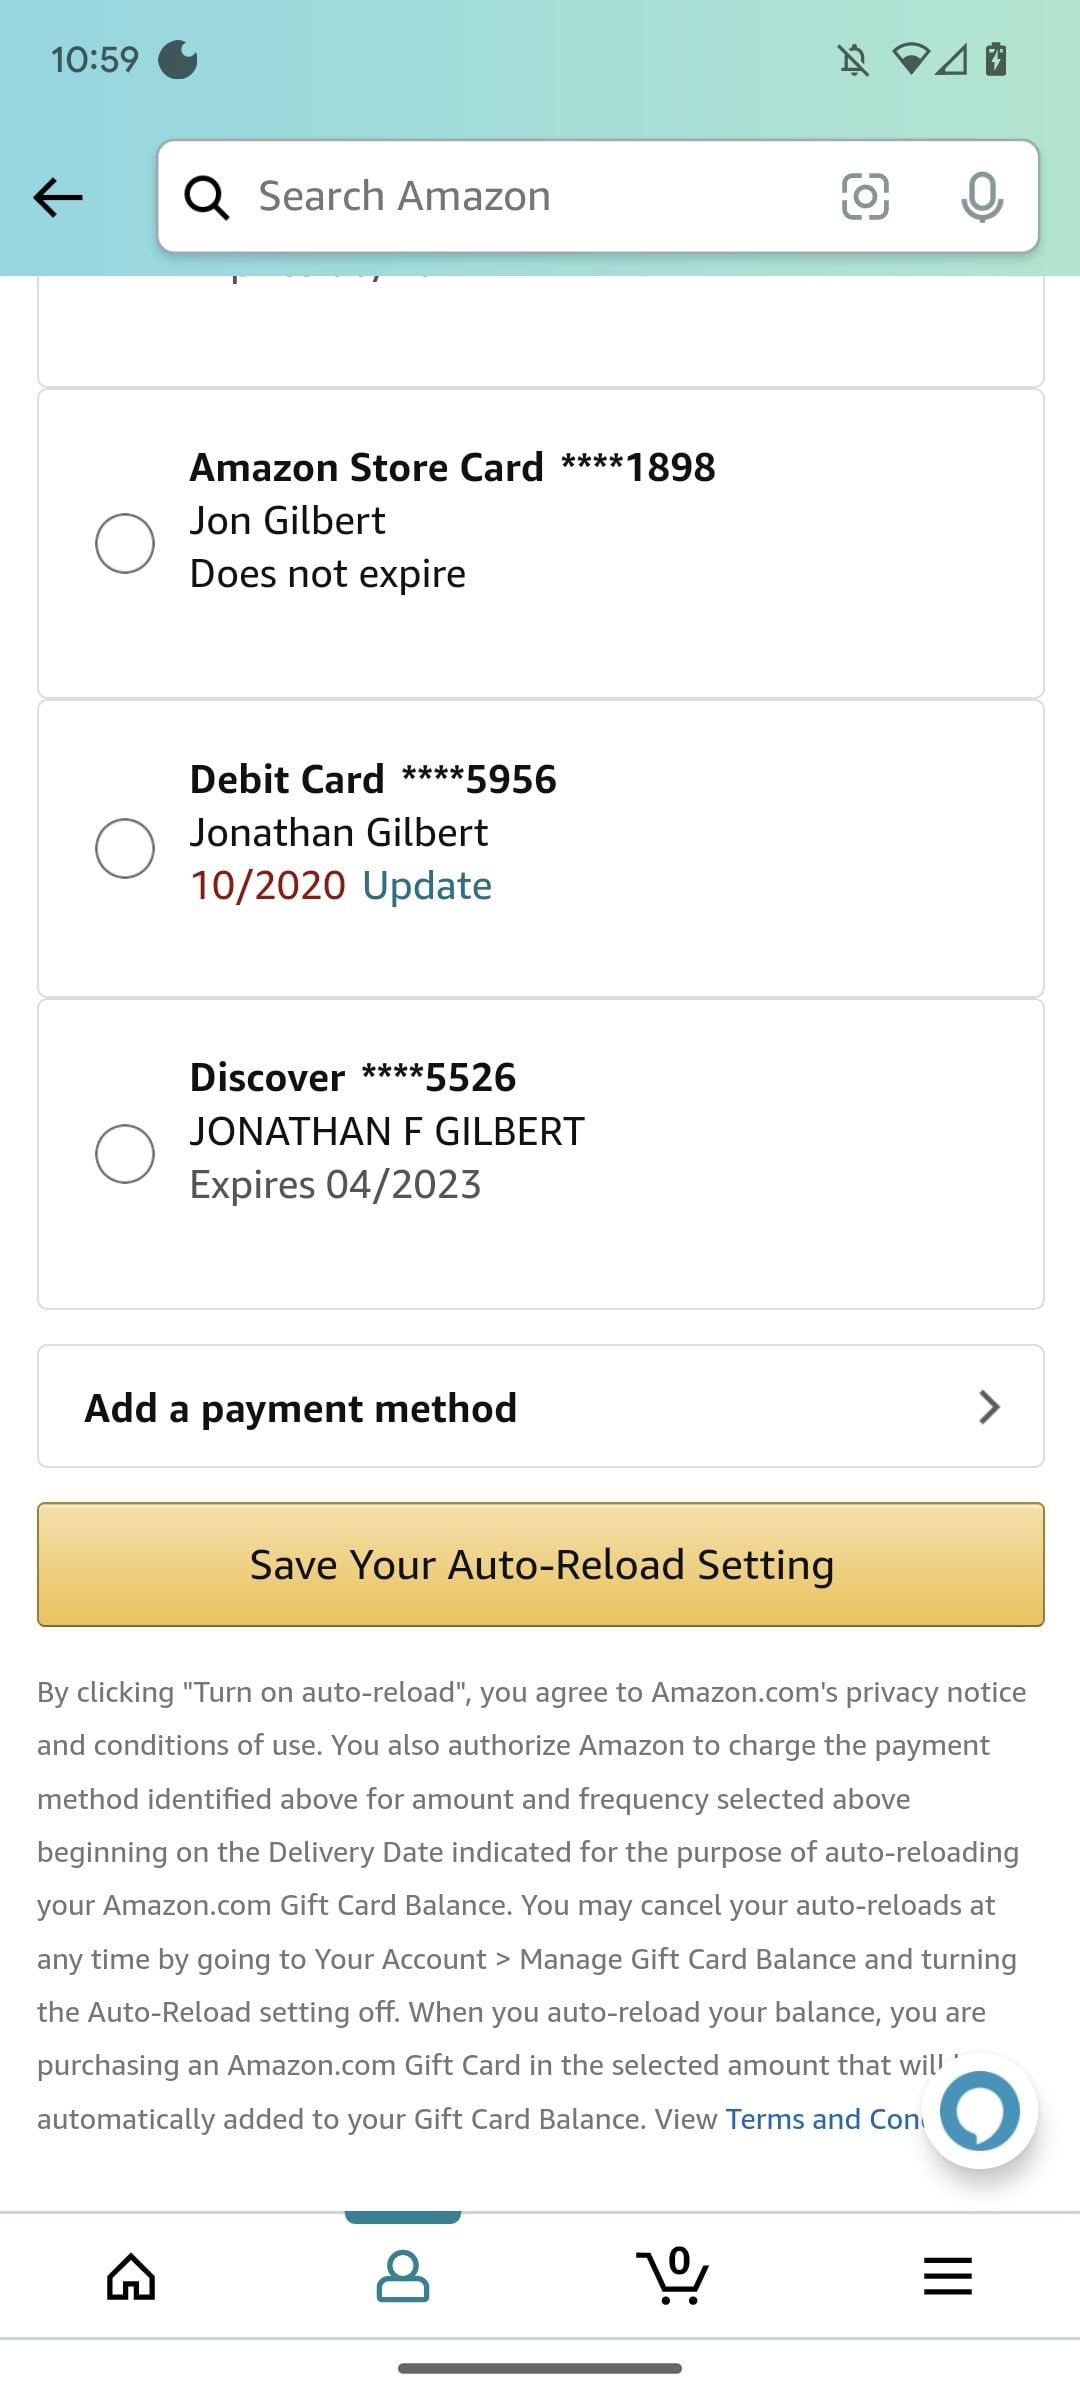 Amazon.com Gift Cards Guide - How to redeem them